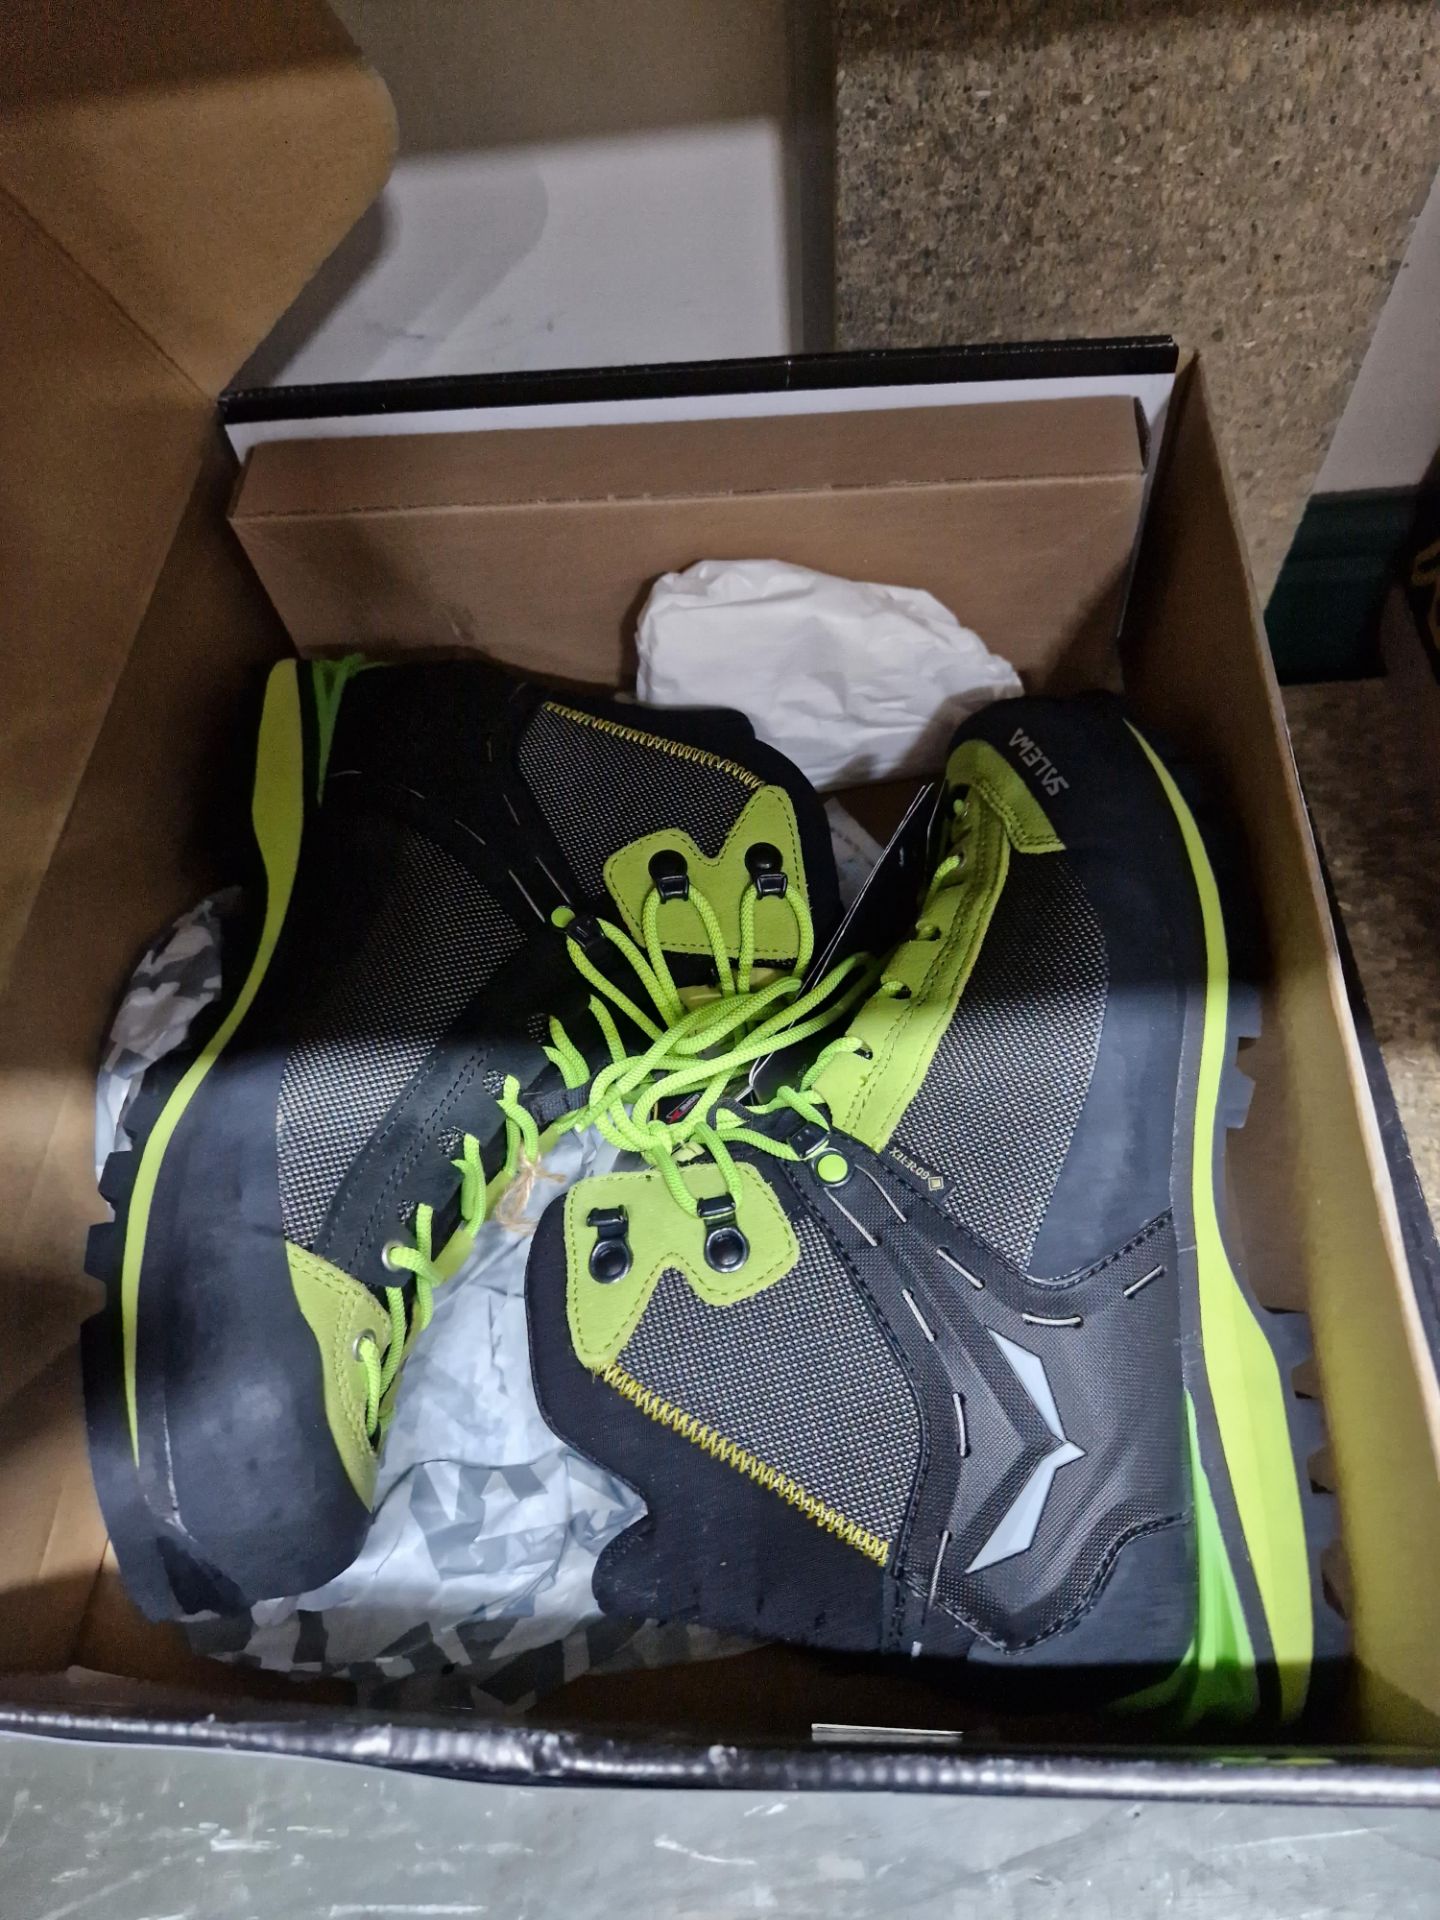 Two Pairs of Salewa MS CROW GTX Boots, Colour: Cactus/Sulphur Spring, Sizes: 7 UK, 12 UK Please read - Image 2 of 2